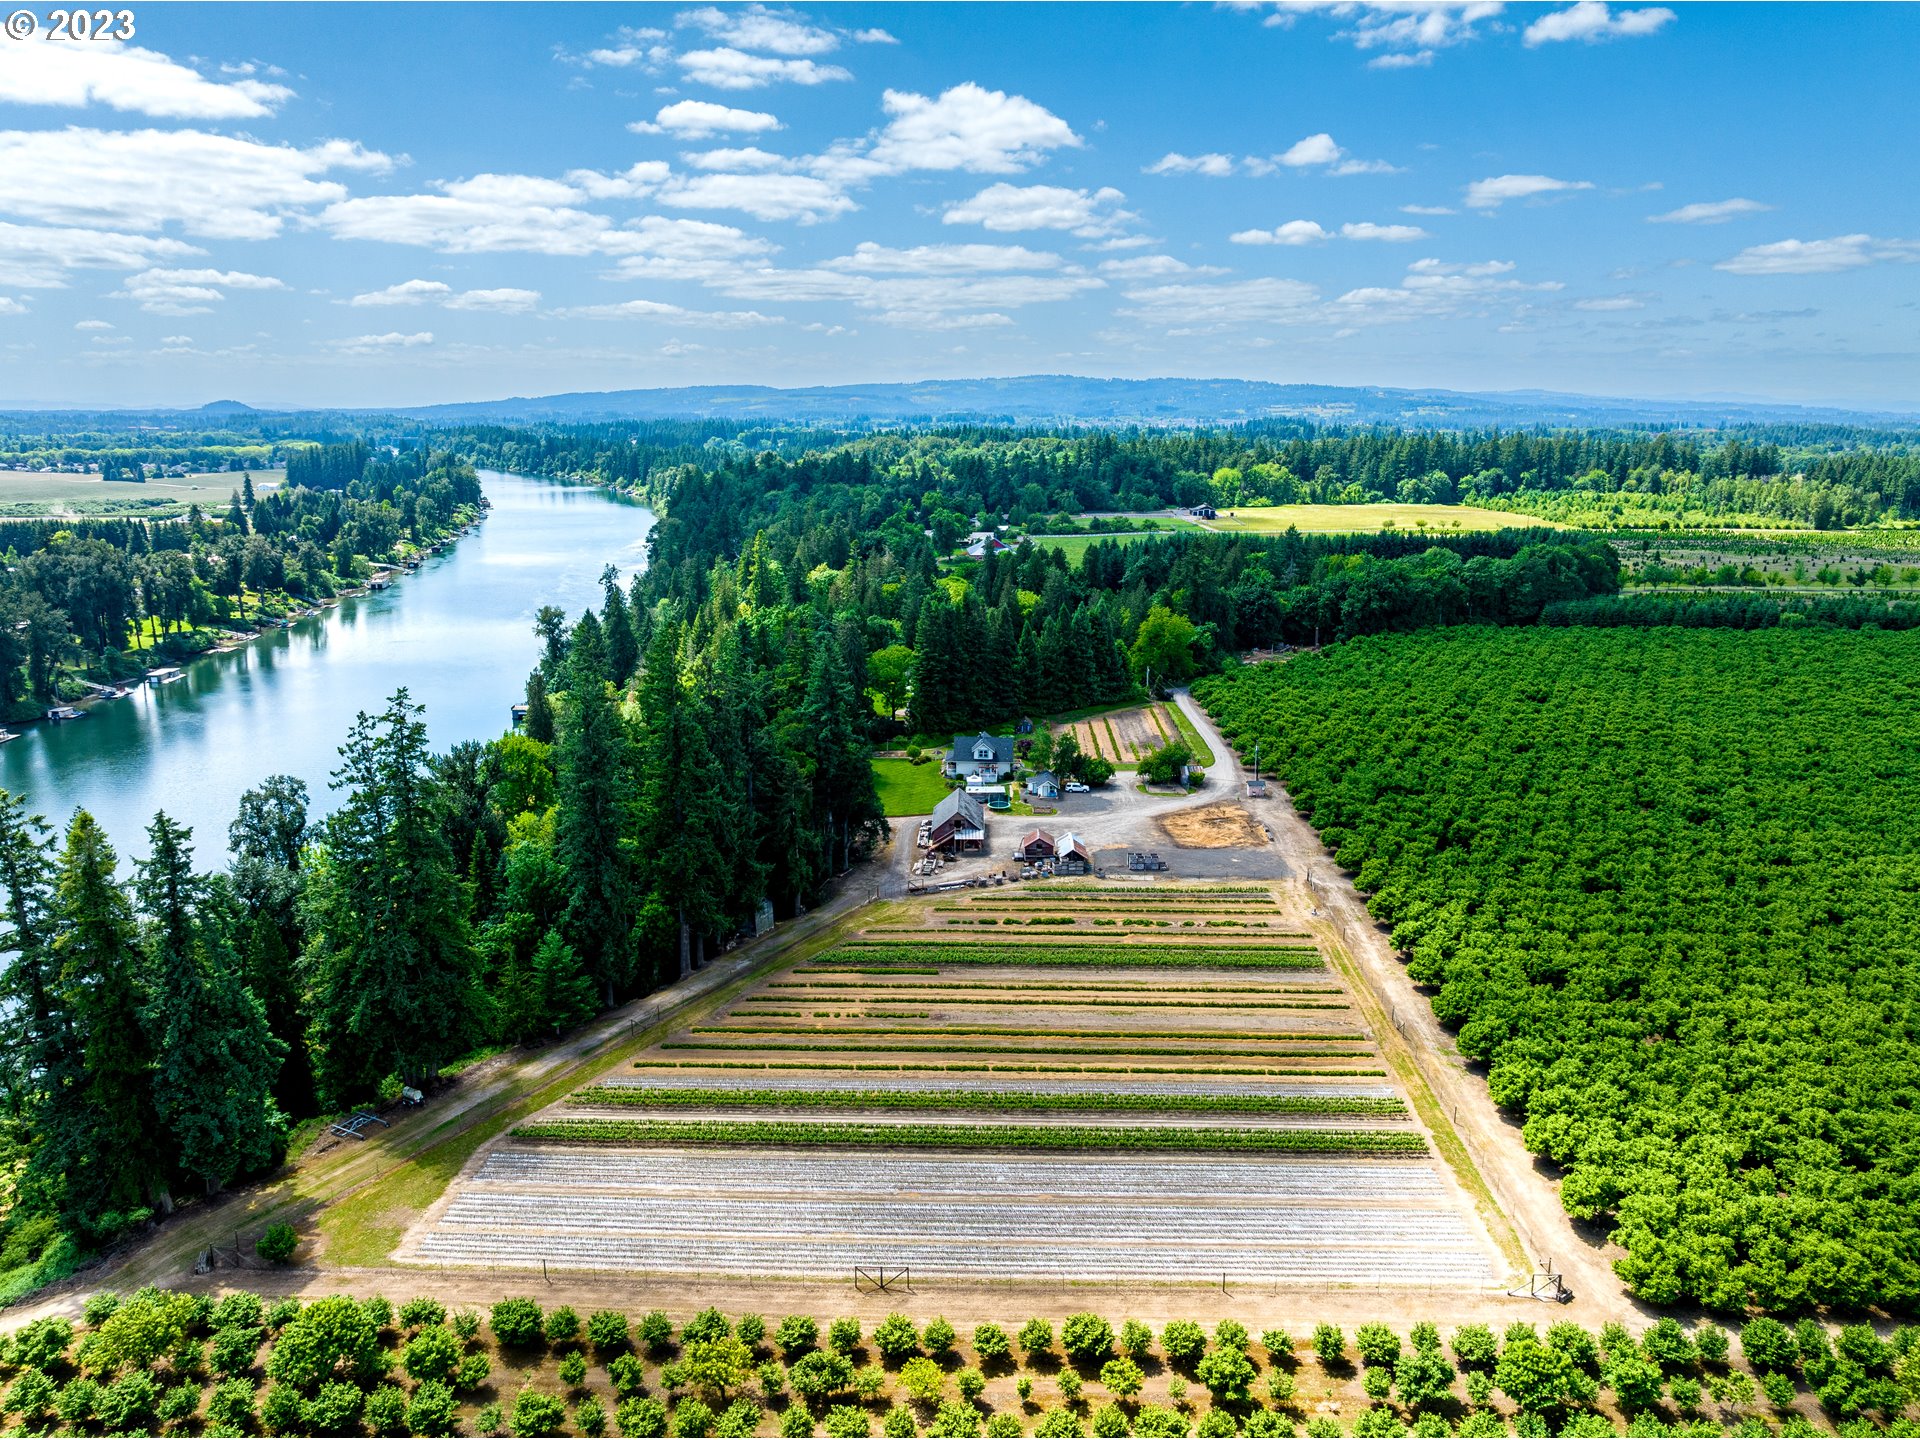 Don't miss this opportunity to acquire this 80-acre riverfront paradise with panoramic sunrise/sunset views and endless possibilities! This extraordinary private farm offers stunning views of the Willamette River, Molalla River, and Cascade Mountains. Including nearly 44 acres of productive tillable/irrigated ground, this farm can grow almost any crop imaginable. There are 2 river access points to a lower bench on the west side of the property and another track to the summer beaches on the east end.